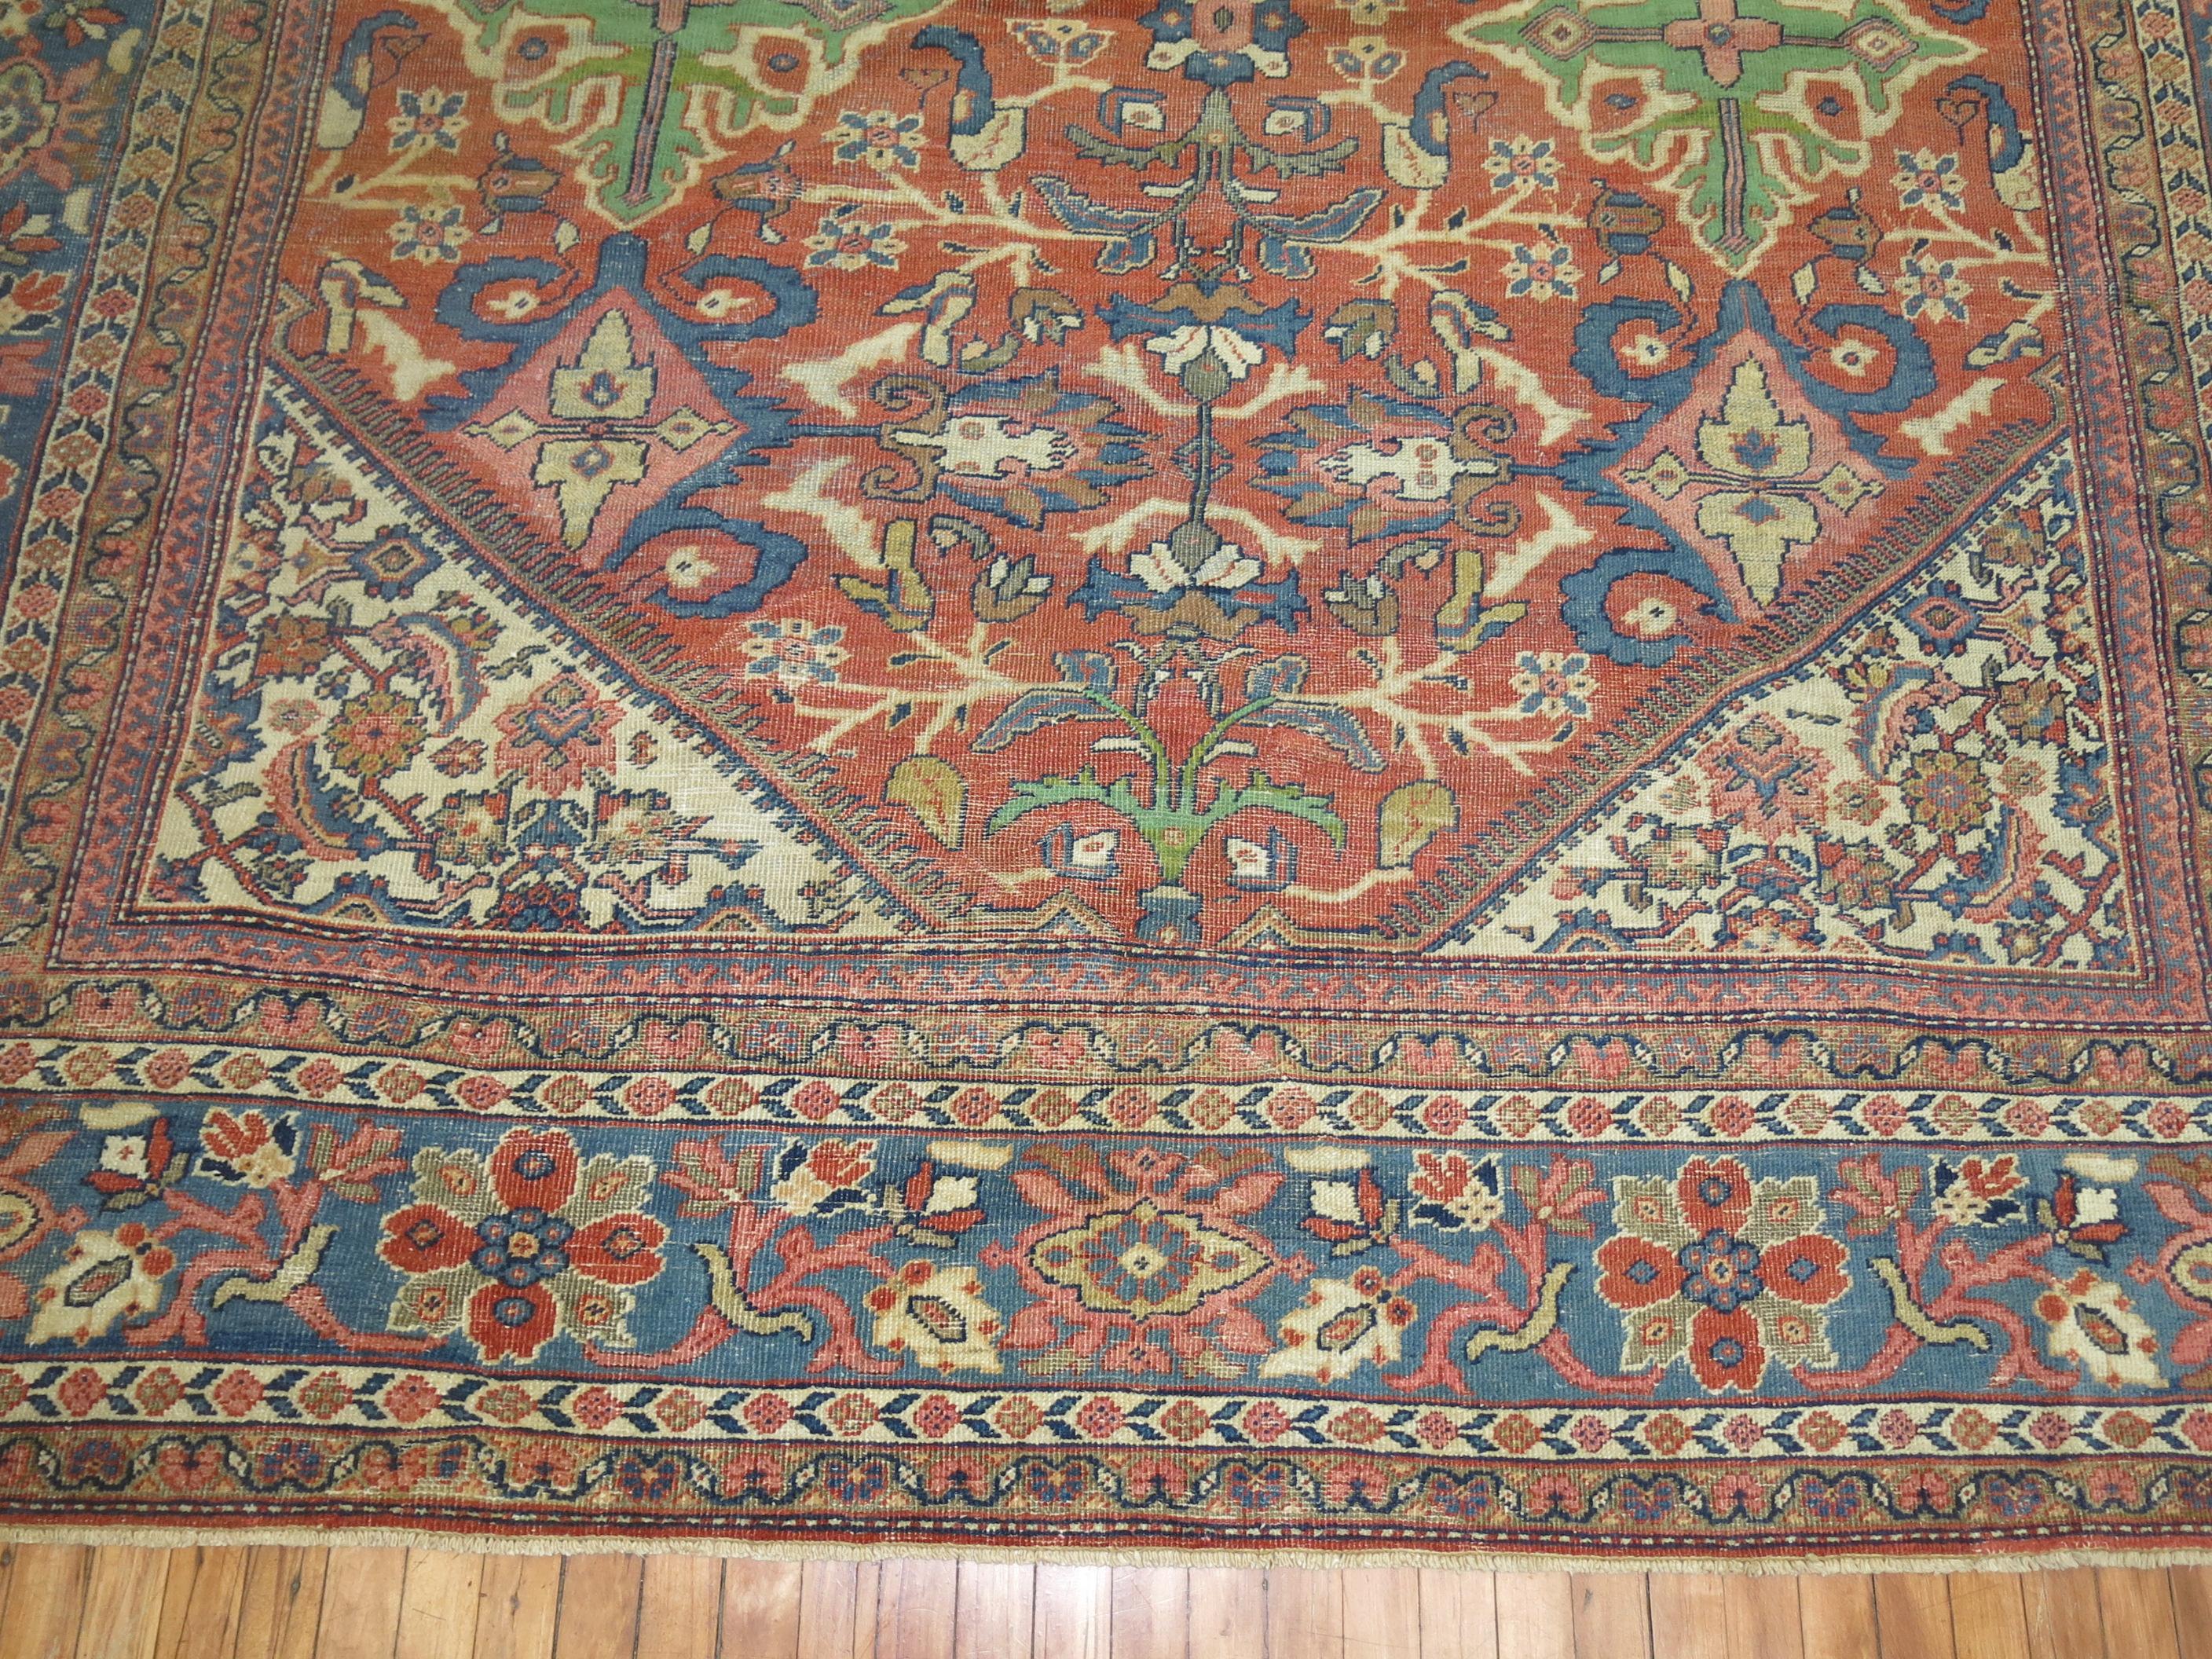 Room size early 20th century antique Persian Mahal rug with an all-over large scale geometric design a rust red field light blue border. Dominant accents in green and pink

Measures: 9'2” x 12'10